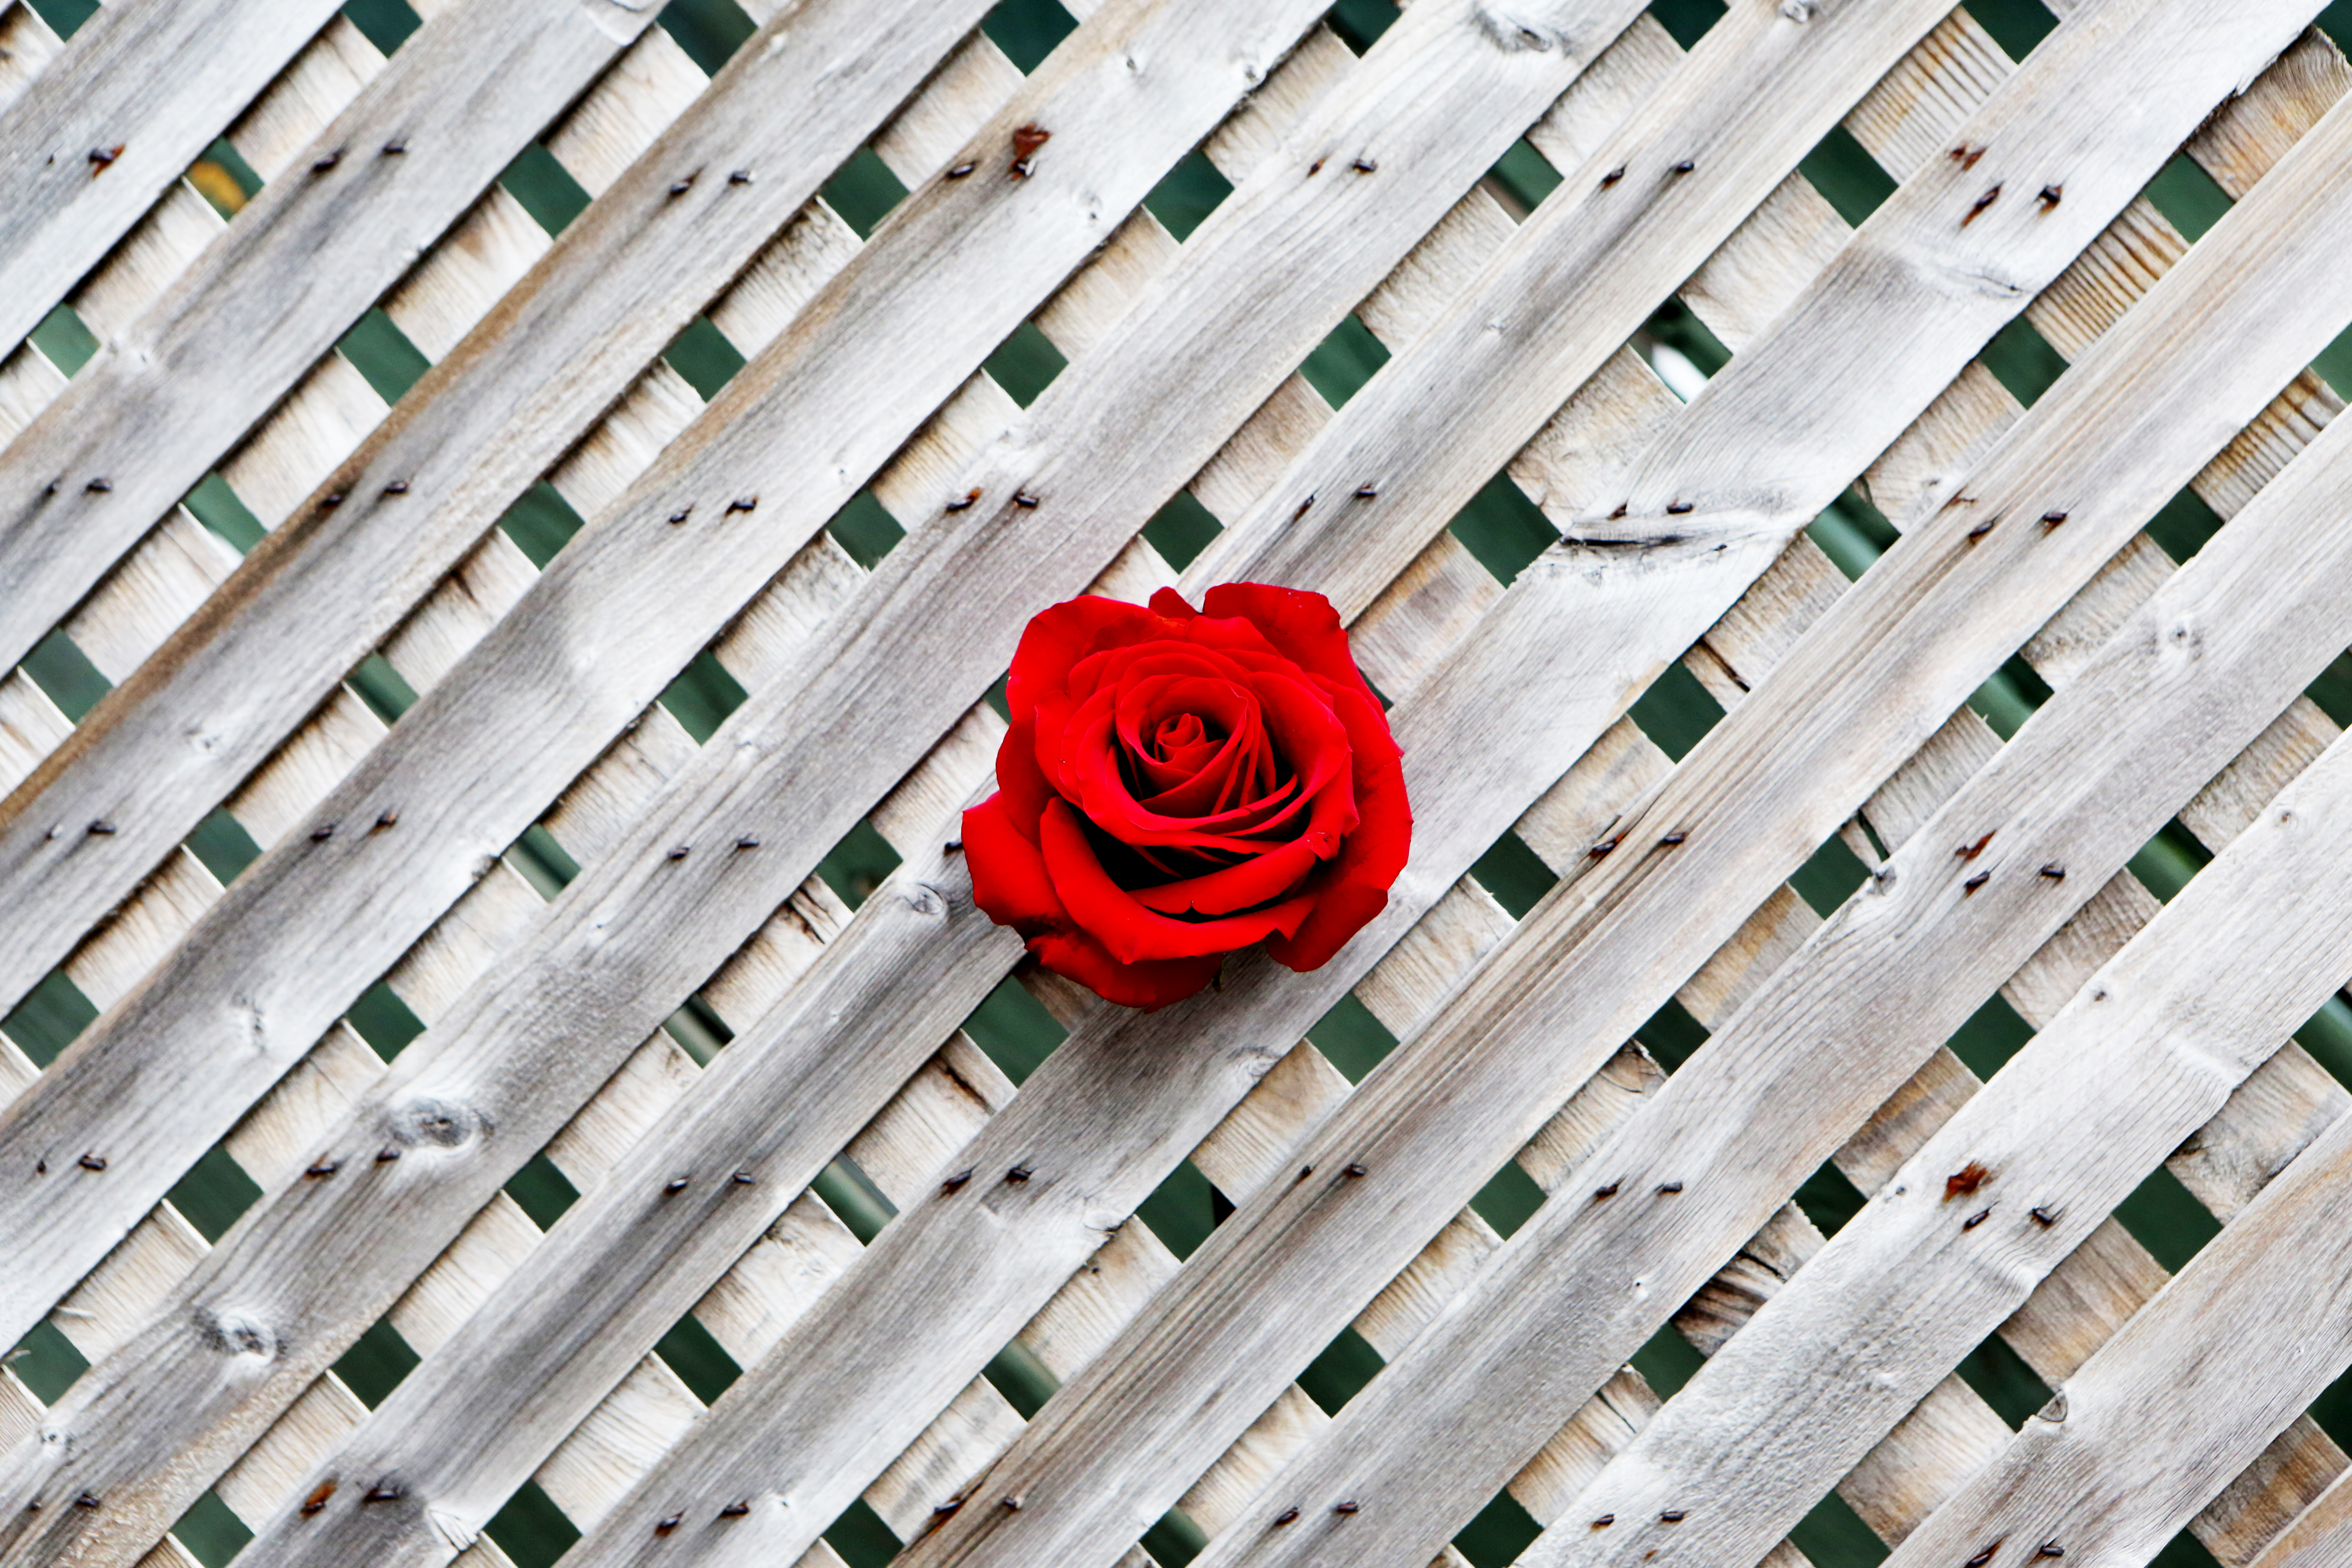 rose, red, wood, wooden, rose flower, minimalism, wall, fence